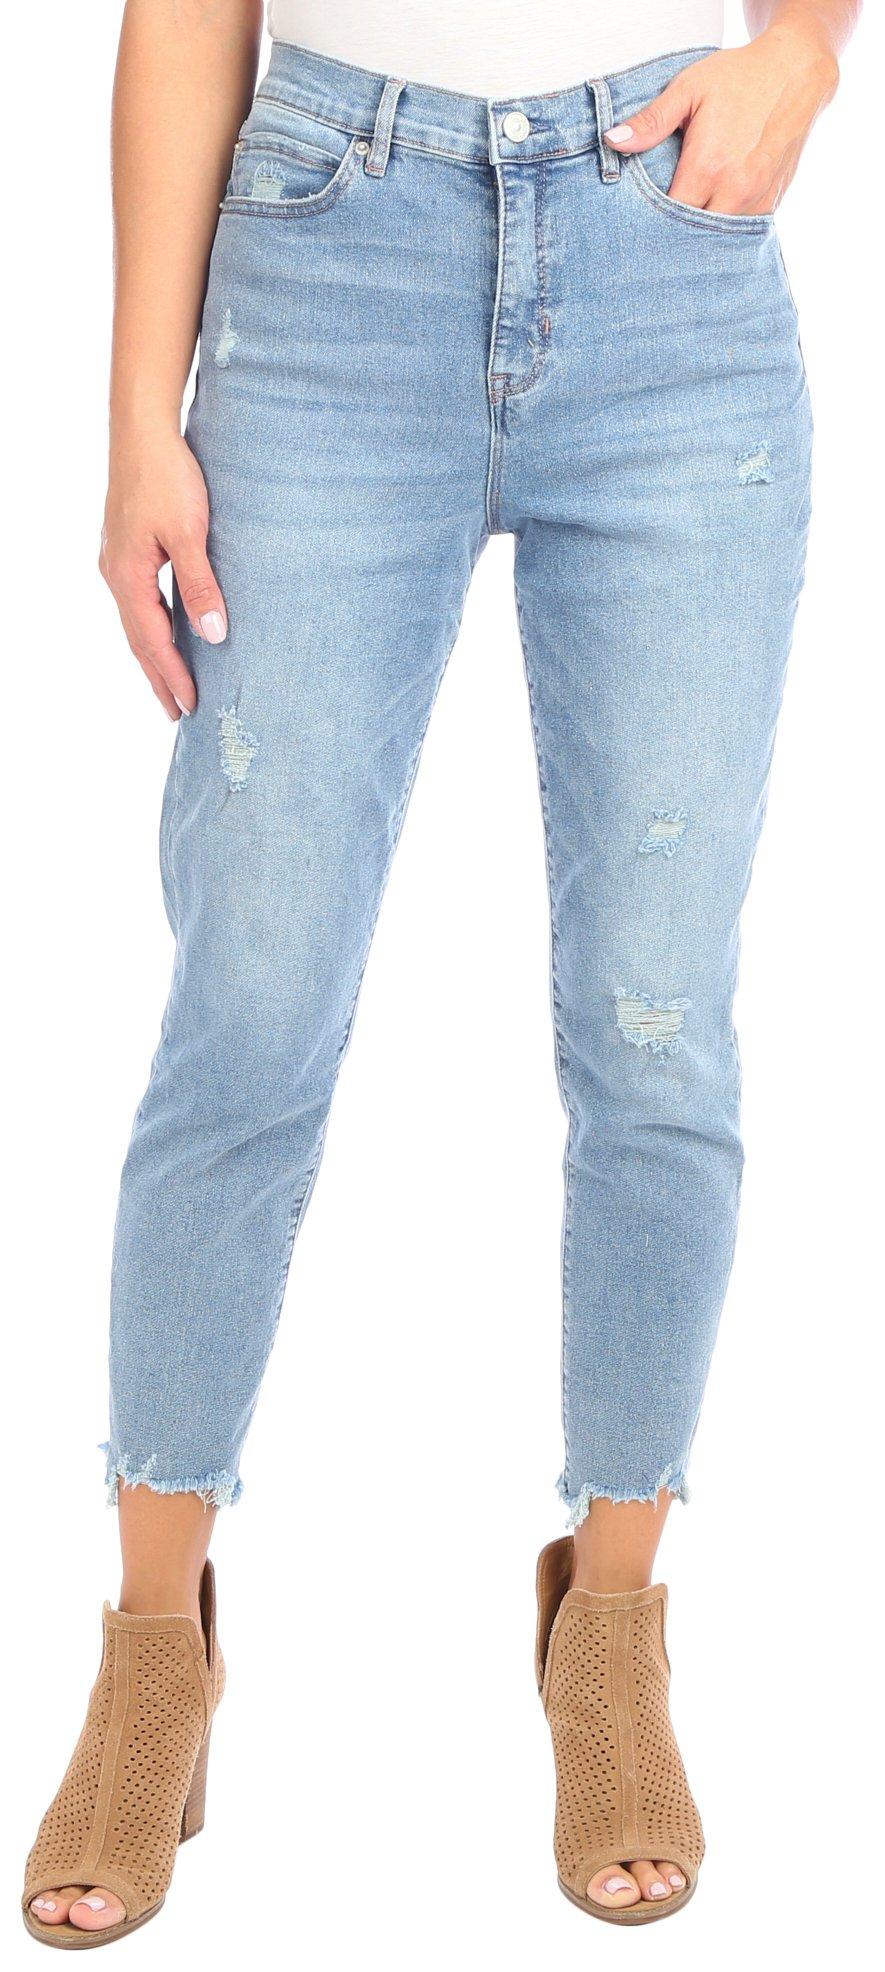 Nicole Miller Womens Deconstructed Skinny Jeans